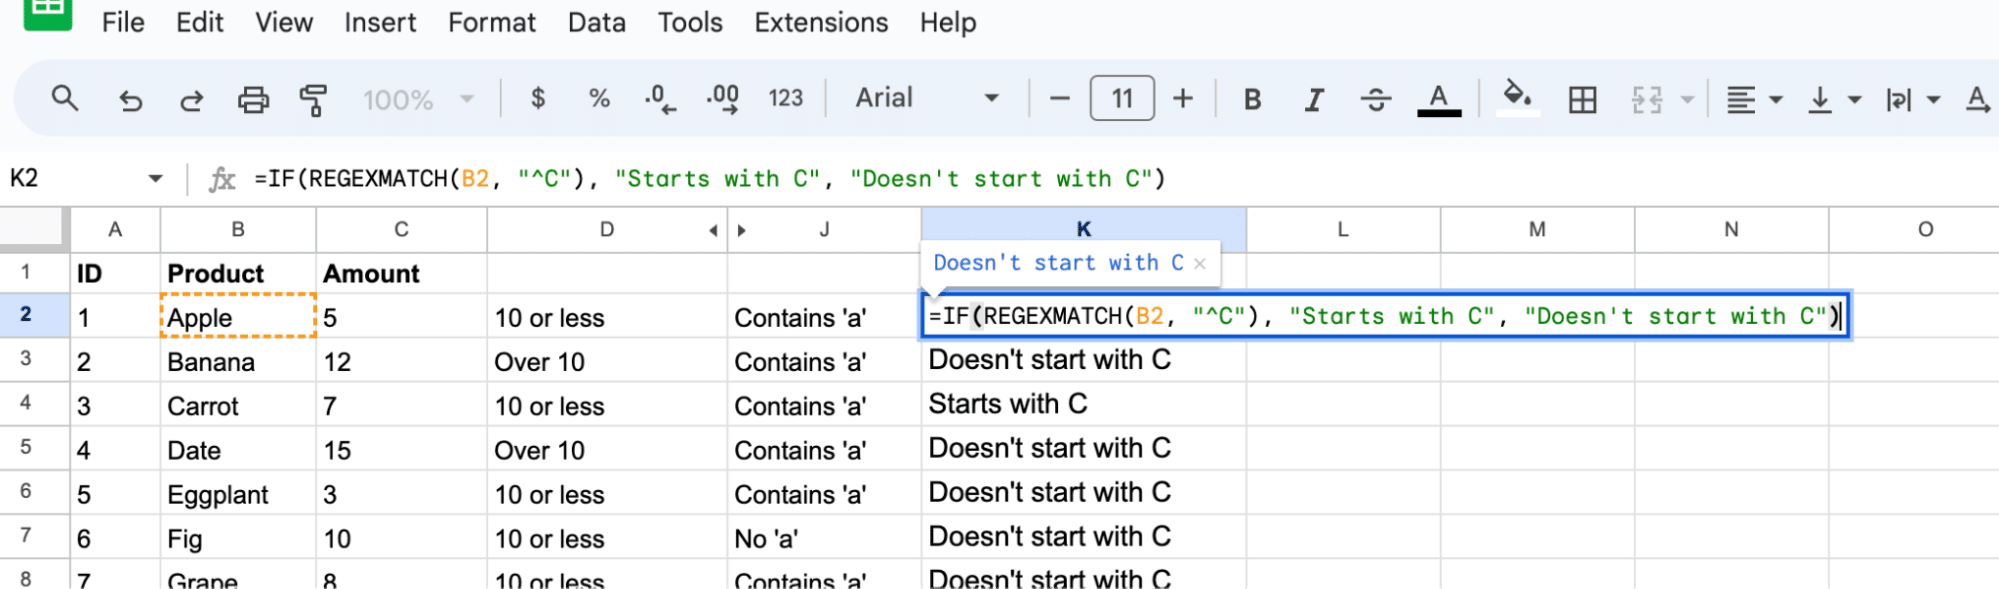 REGEXMATCH function to find products starting with 'C' in Google Sheets.